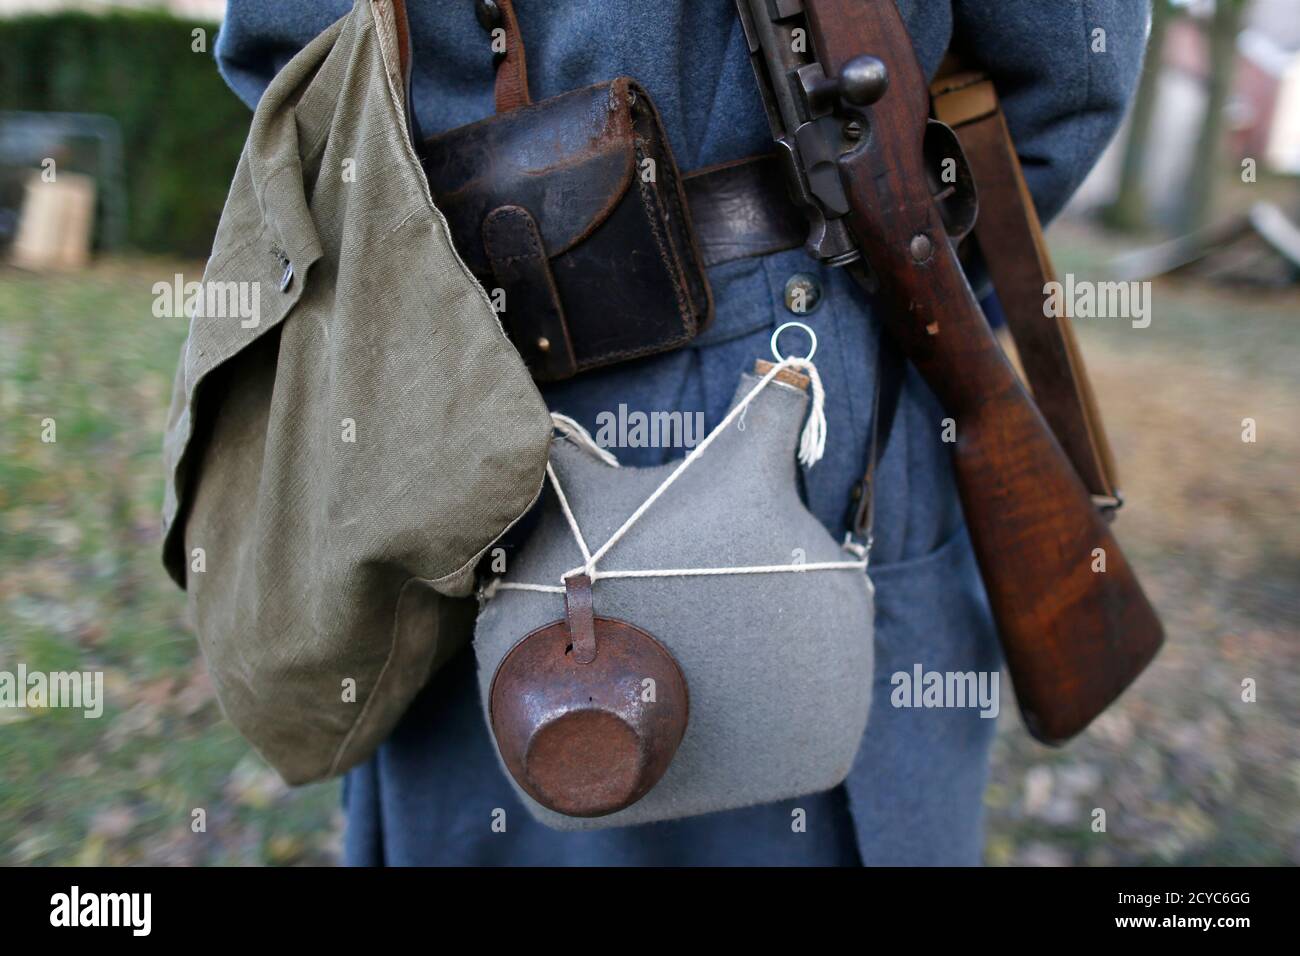 Flask, mug and gun are carried by a World War One Historical Association '14-18 en Somme' member at a bivouac camp in Fouilloy Northern France, November 10, 2013. The historical association '14-18 en Somme' was created in August 2009 by French history teacher Sylvain Pinard with the aim of keeping alive the memory of the soldiers of World War One, and promoting understanding of the battles of the Great War. Armed with their motto 'Never forget, always remember', the 30 members live, eat and sleep in the same conditions as the soldiers of 1914-18. Throughout the year, they take part in official Stock Photo